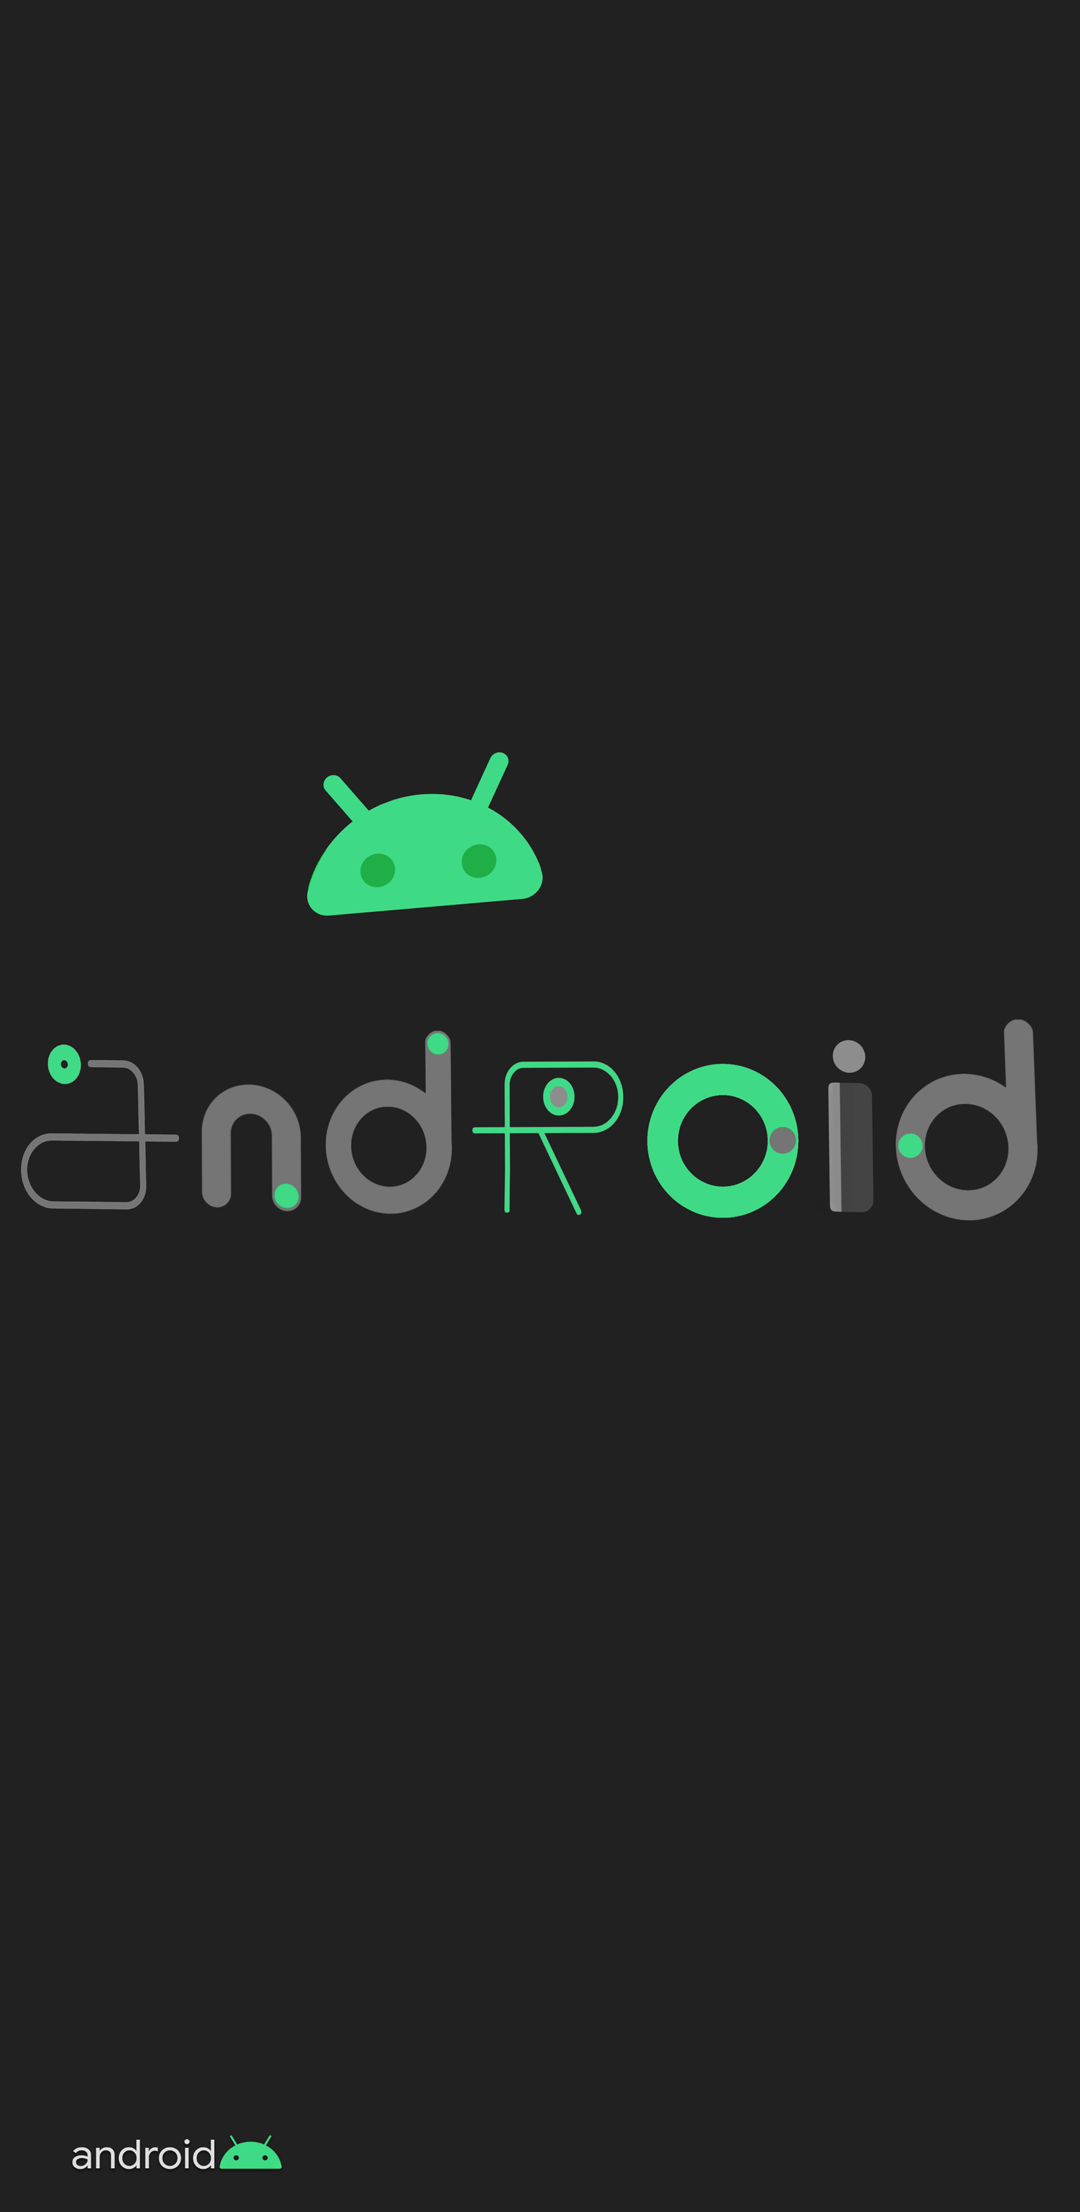 Android 10 boot screen